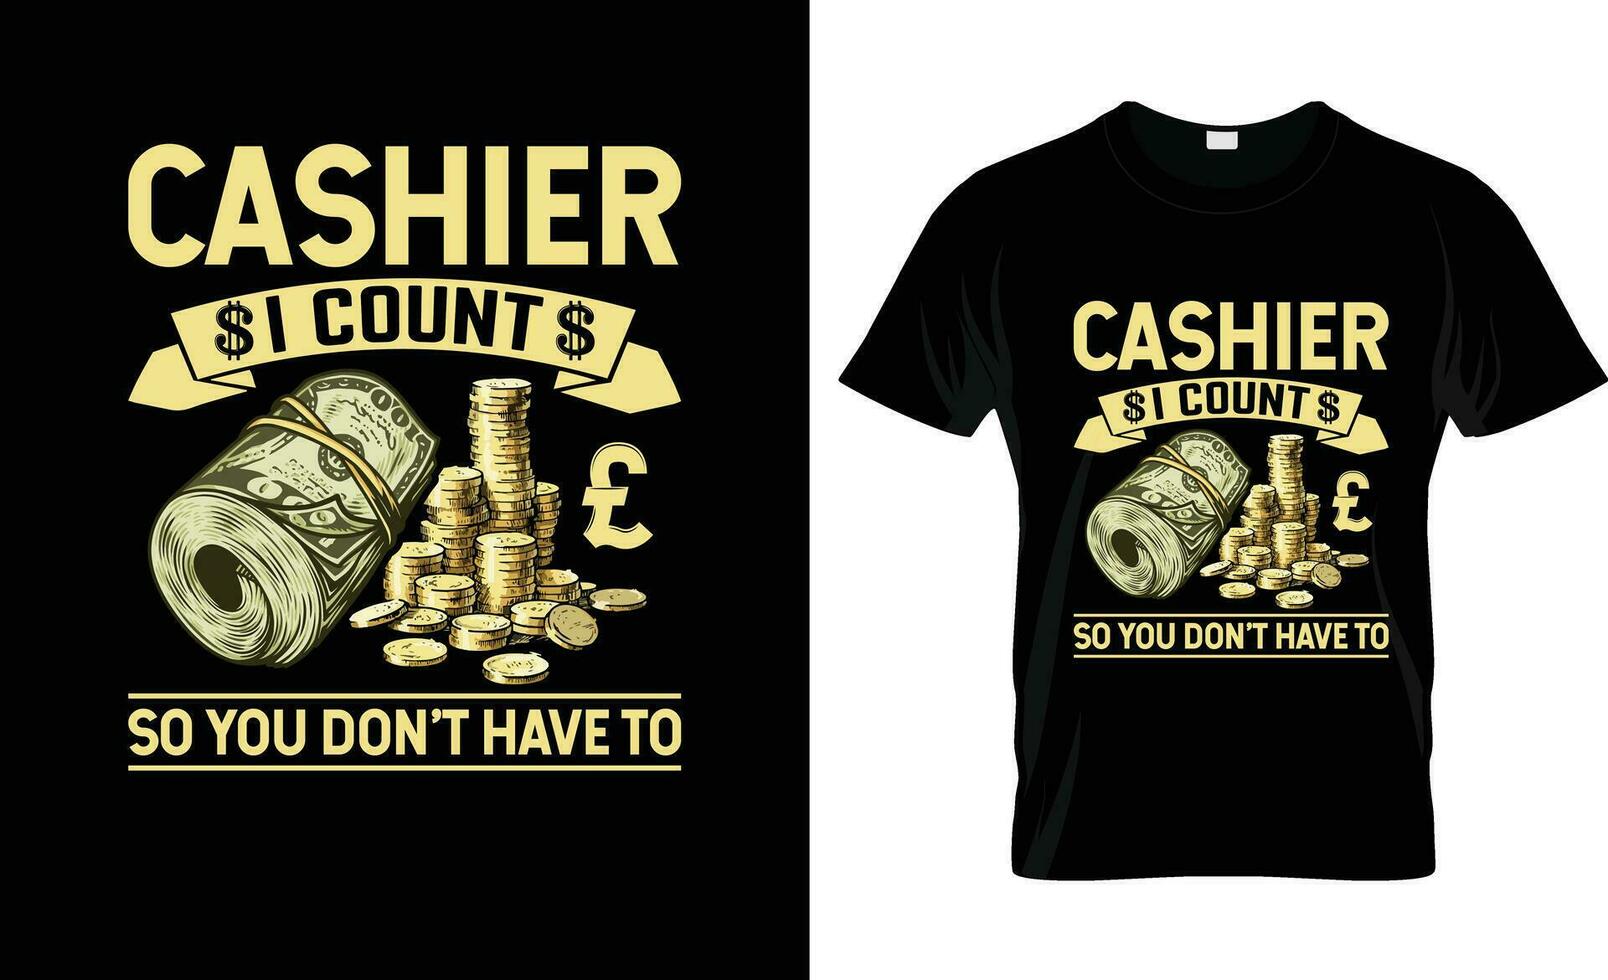 cashier i count so you don't have to colorful Graphic T-Shirt,  t-shirt print mockup vector